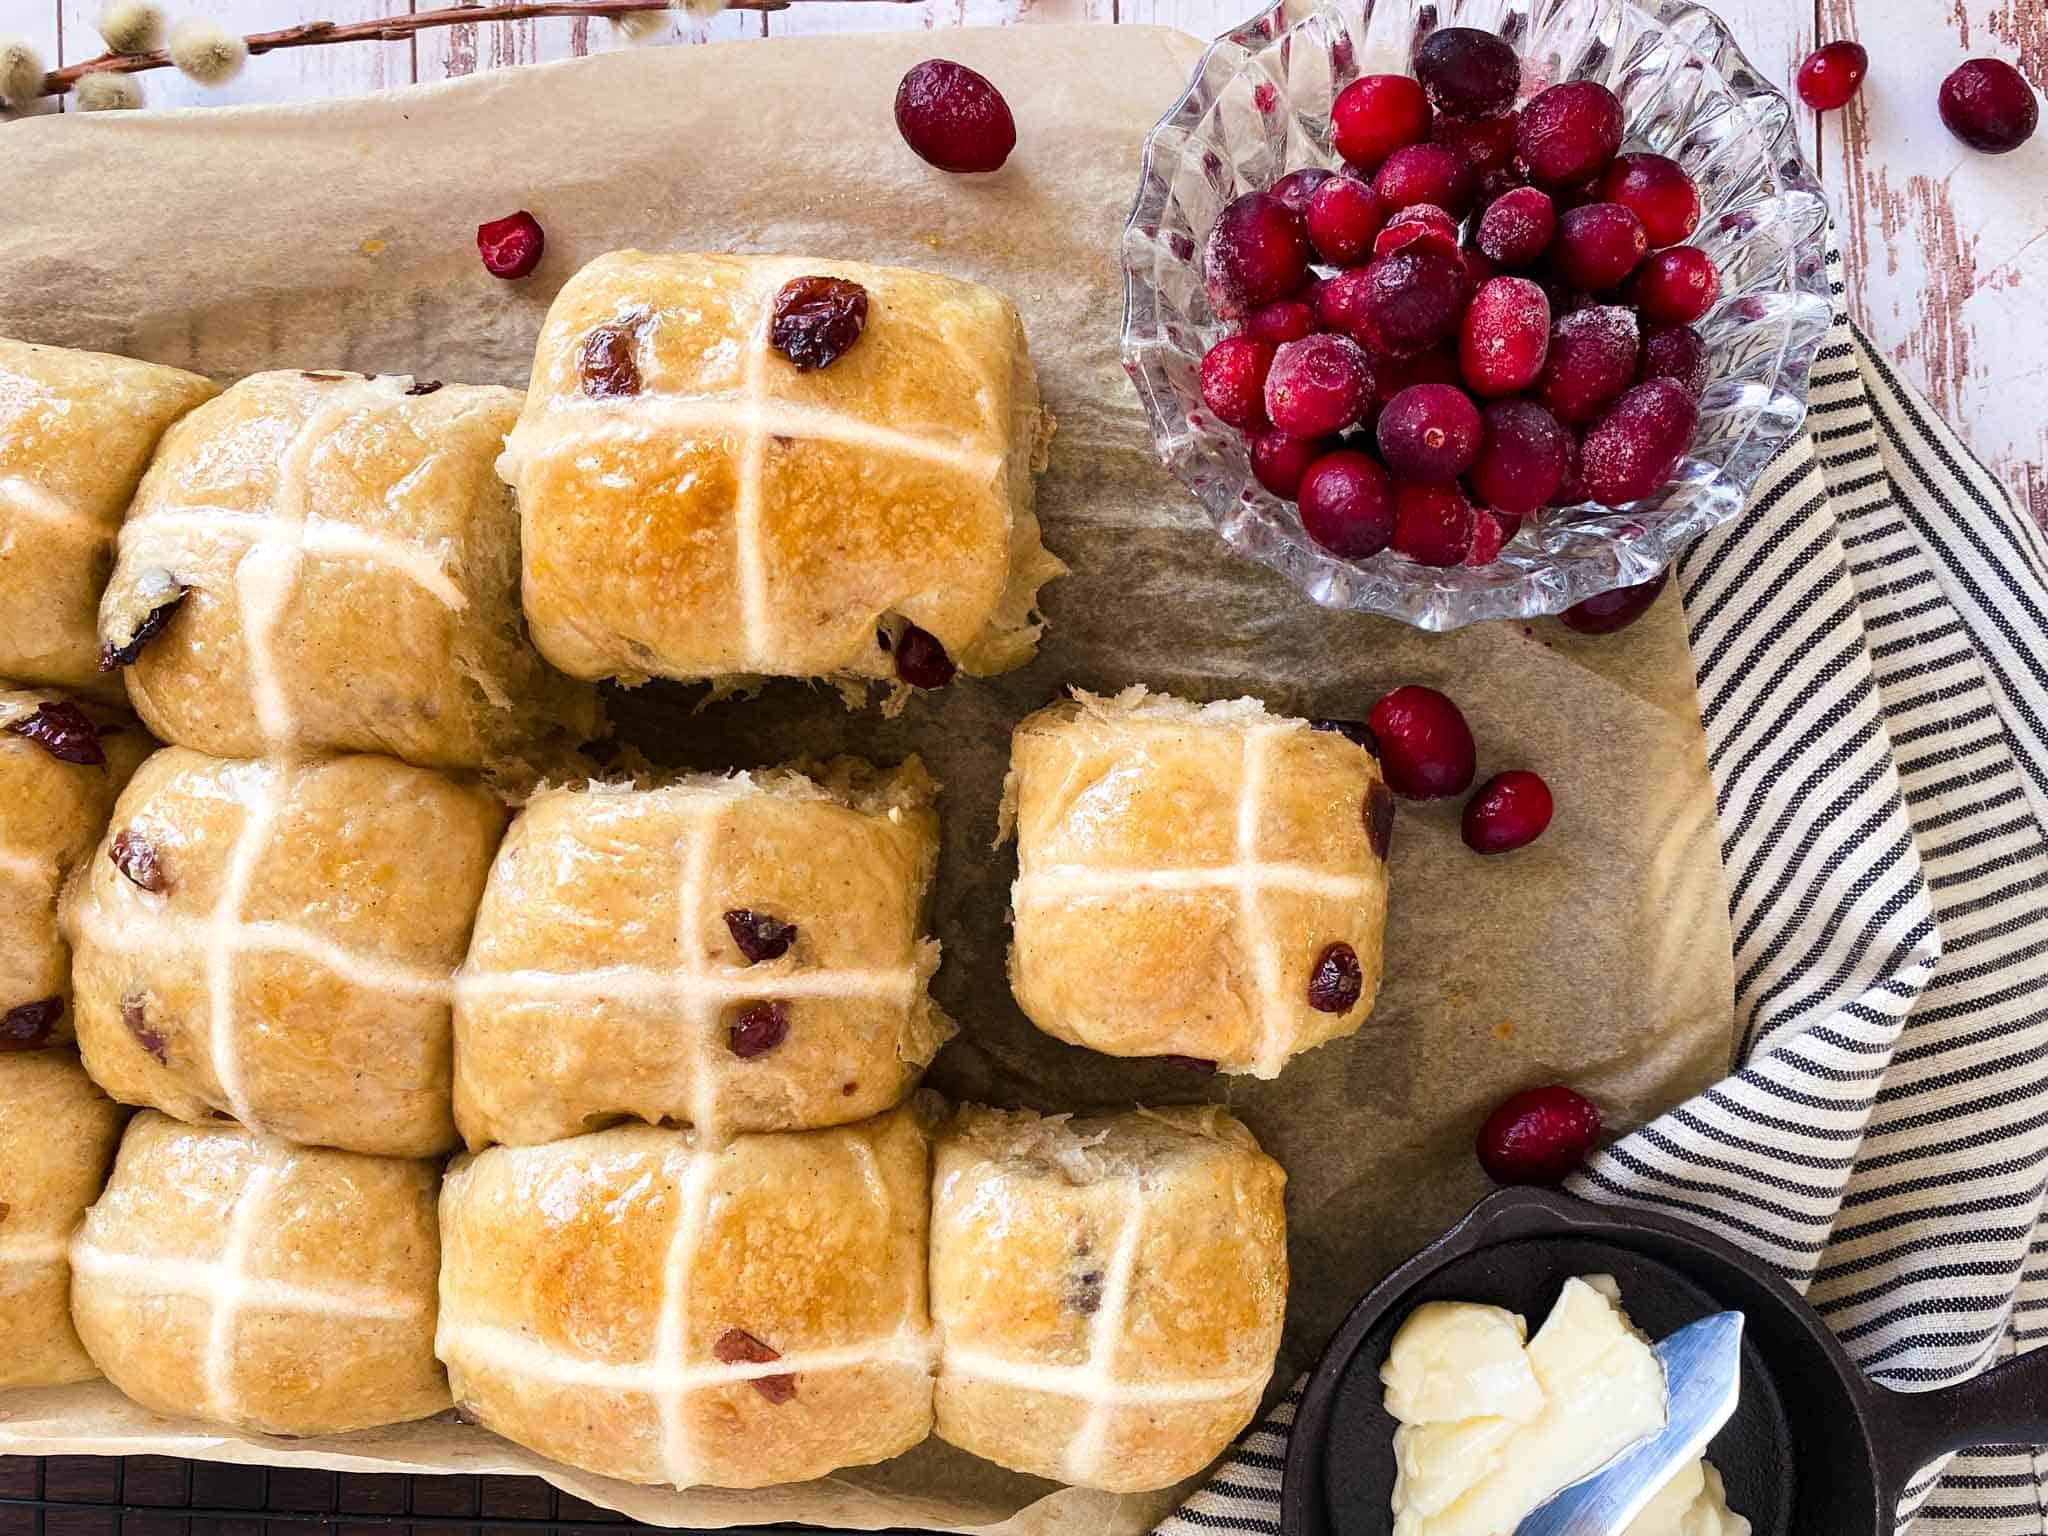 Overhead view of sourdough hot cross buns including cranberries in a decorative glass bowl and butter in a cast iron dish.